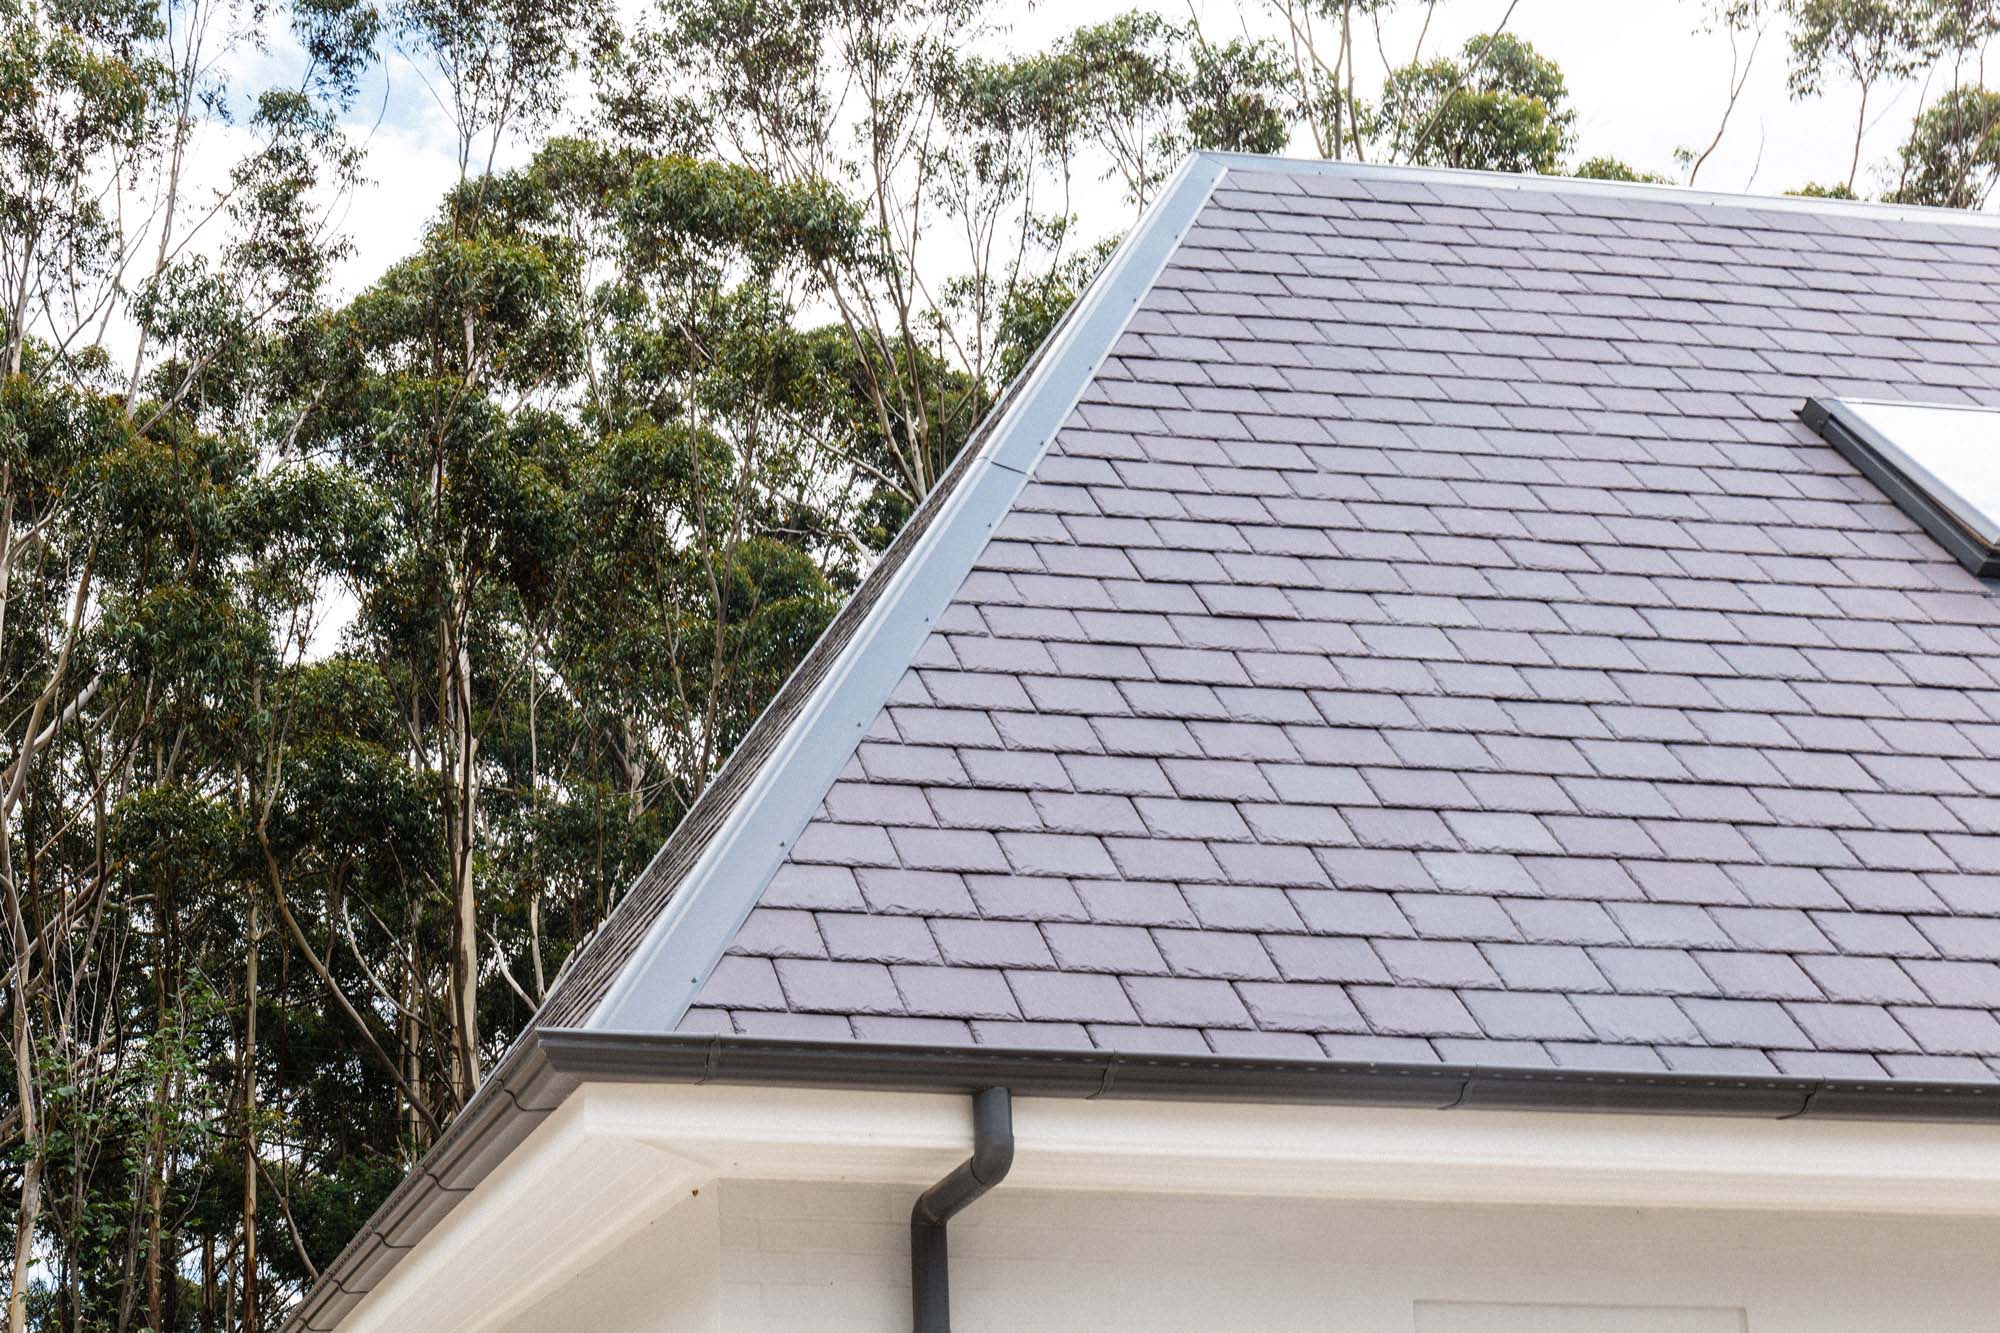 WHAT’S THE BEST SLATE FOR ROOFING?